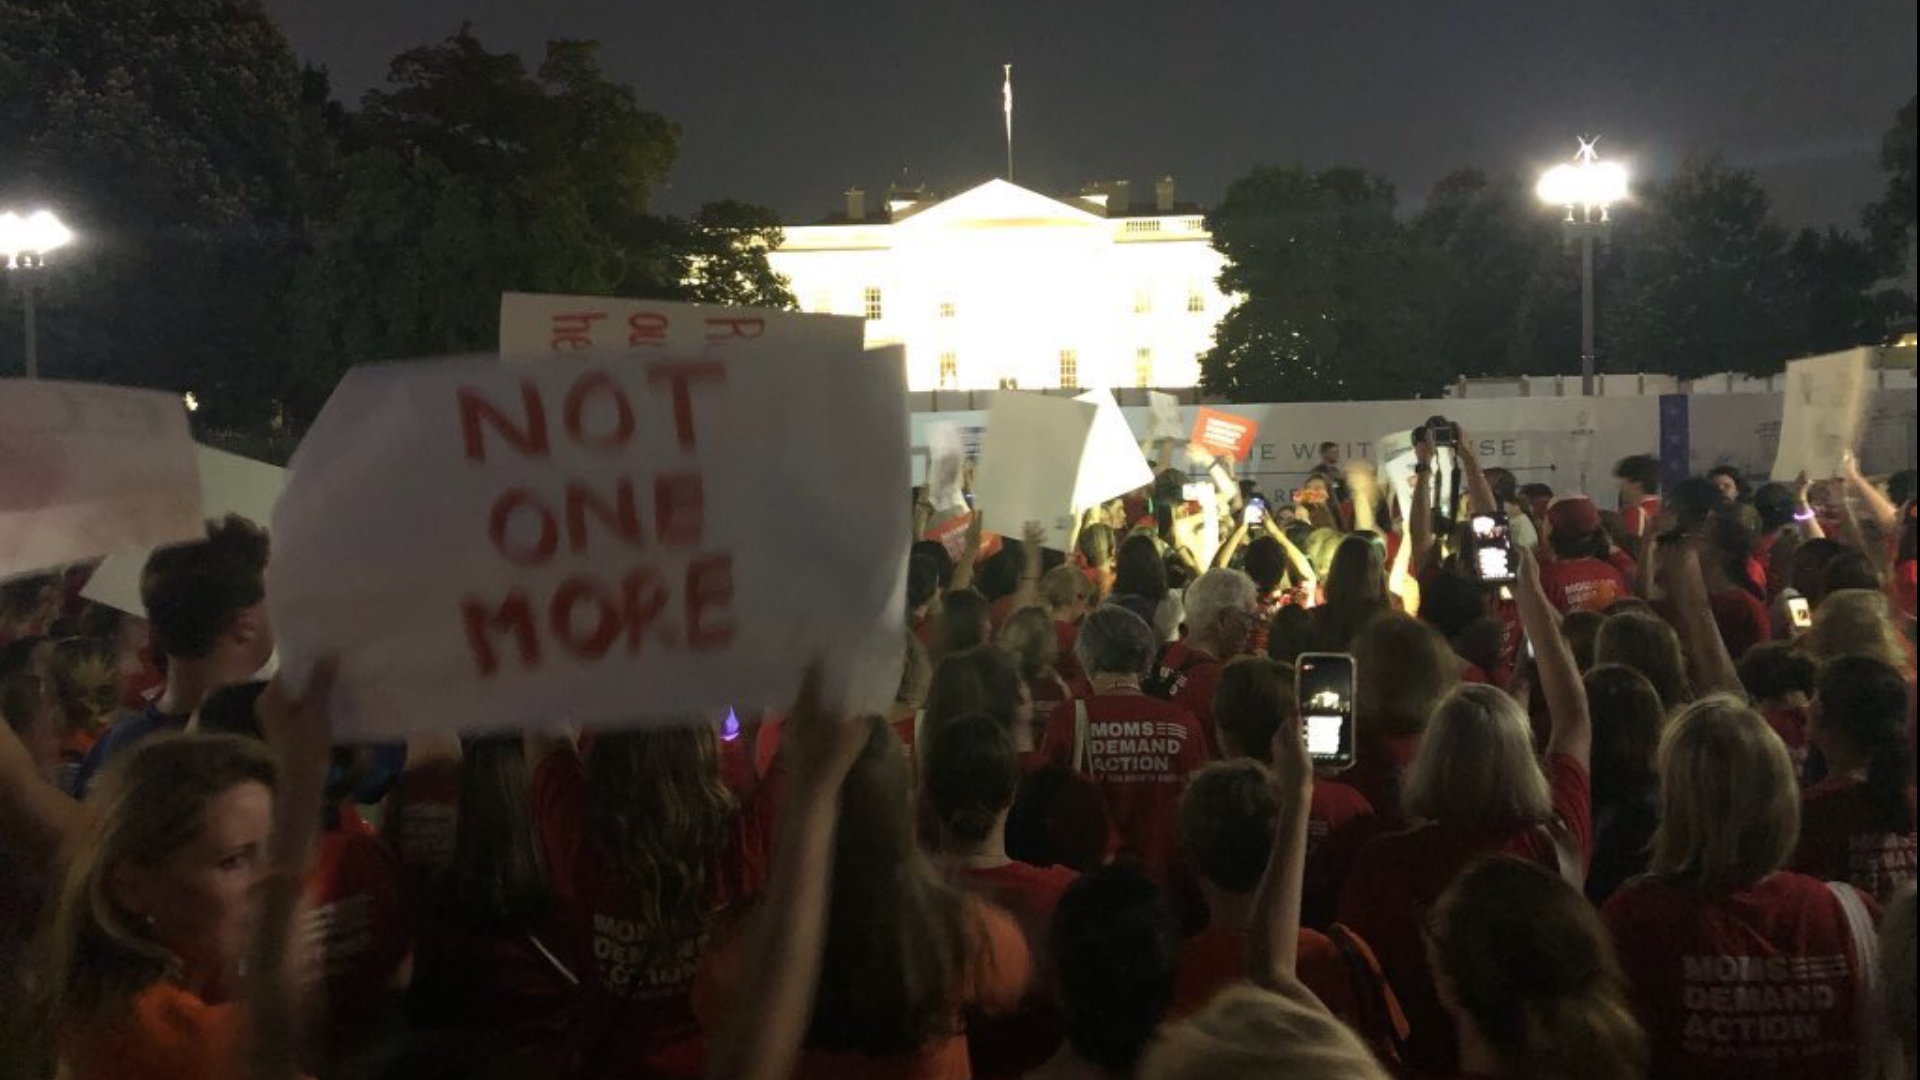 A group of activists called Moms Demand Action are rallying at the White House in an effort to call attention to gun violence prevention in America. Volunteers say they are gathering to protest the inaction of legislators and their failure to protect children, families and communities.